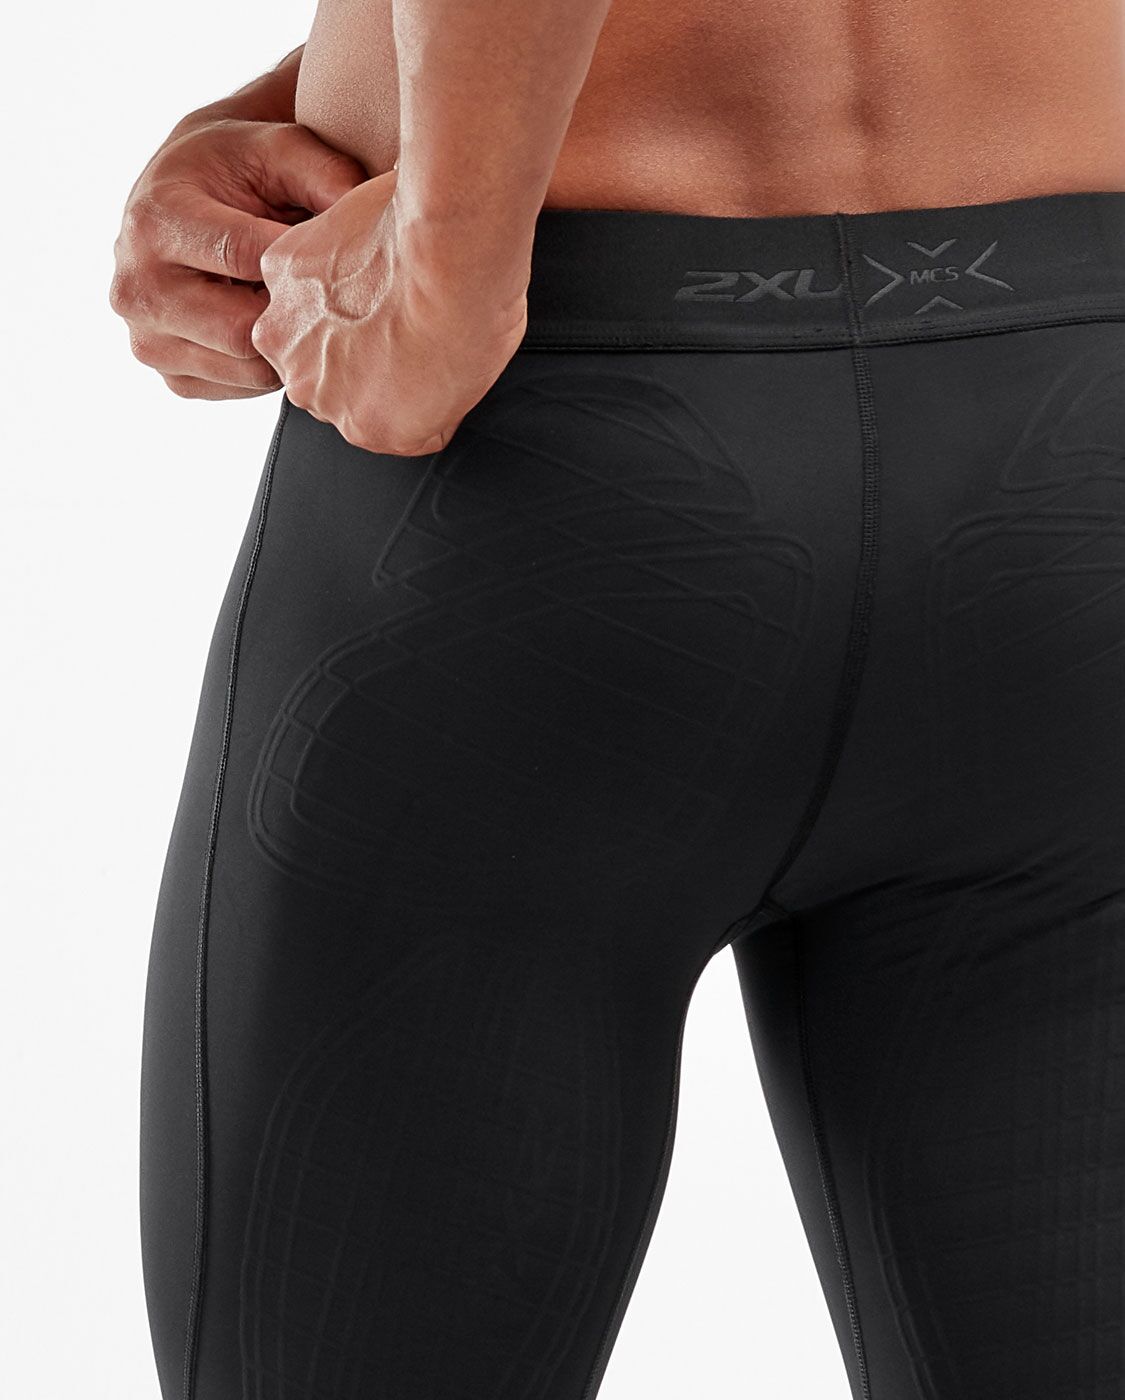 2XU South Africa - Men's Force Compression Tights - Black/Gold